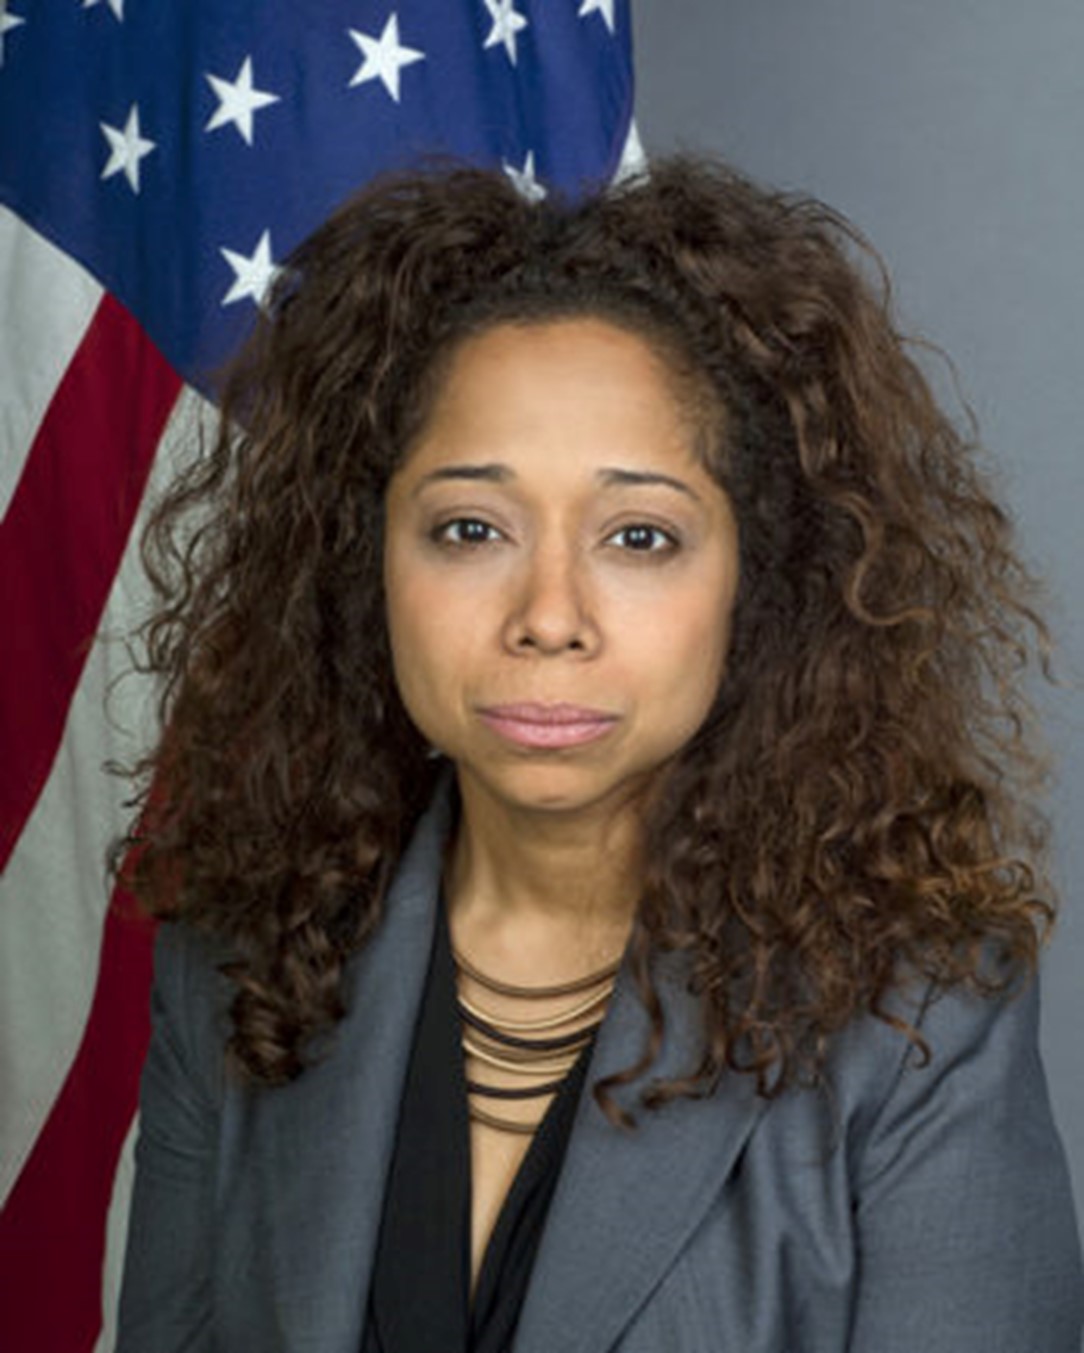 A headshot photo of Julissa Reynoso. She is wearing a grey suit with a black shirt underneath. Her hair is down and she is looking directly into the camera. There is an American flag behind here, and a grey background.